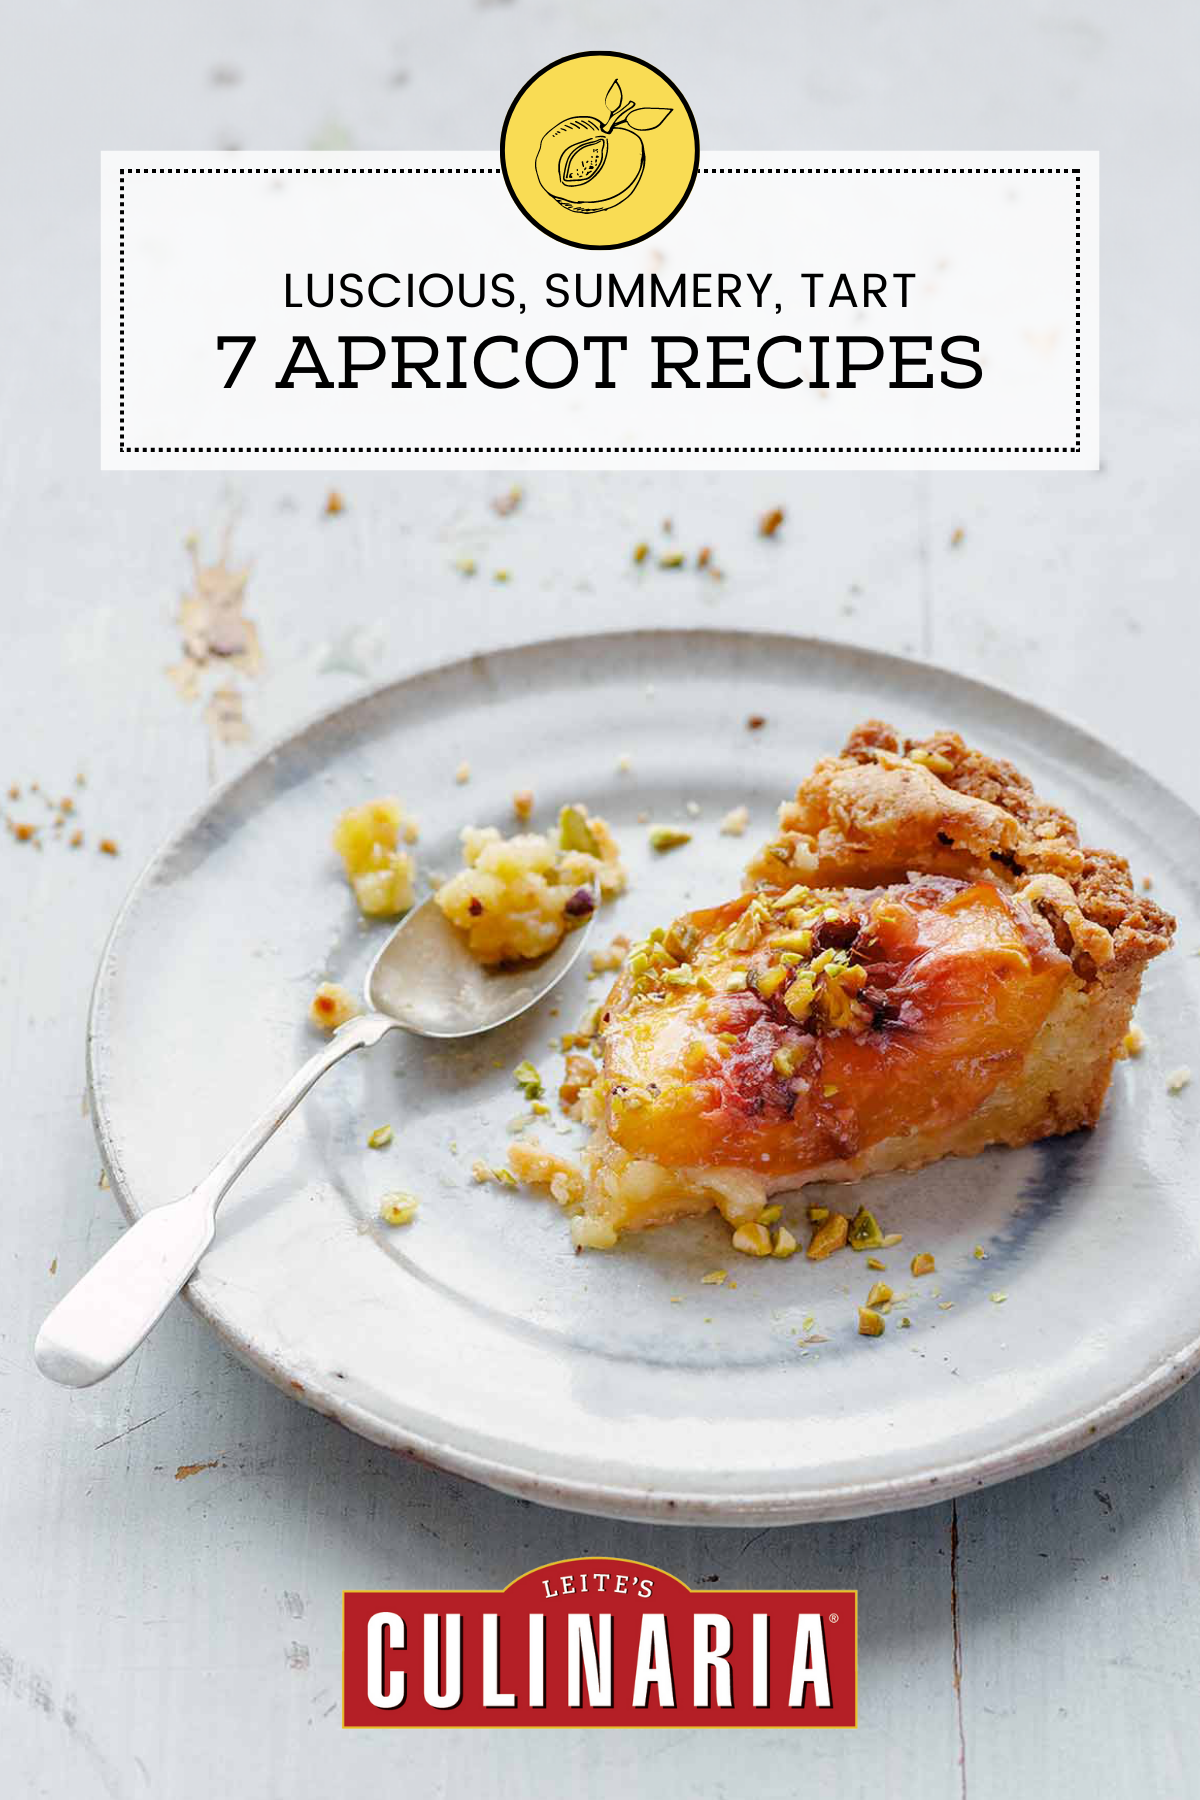 Plate with an slice of apricot tart filled with frangipane and topped with chopped pistachios.